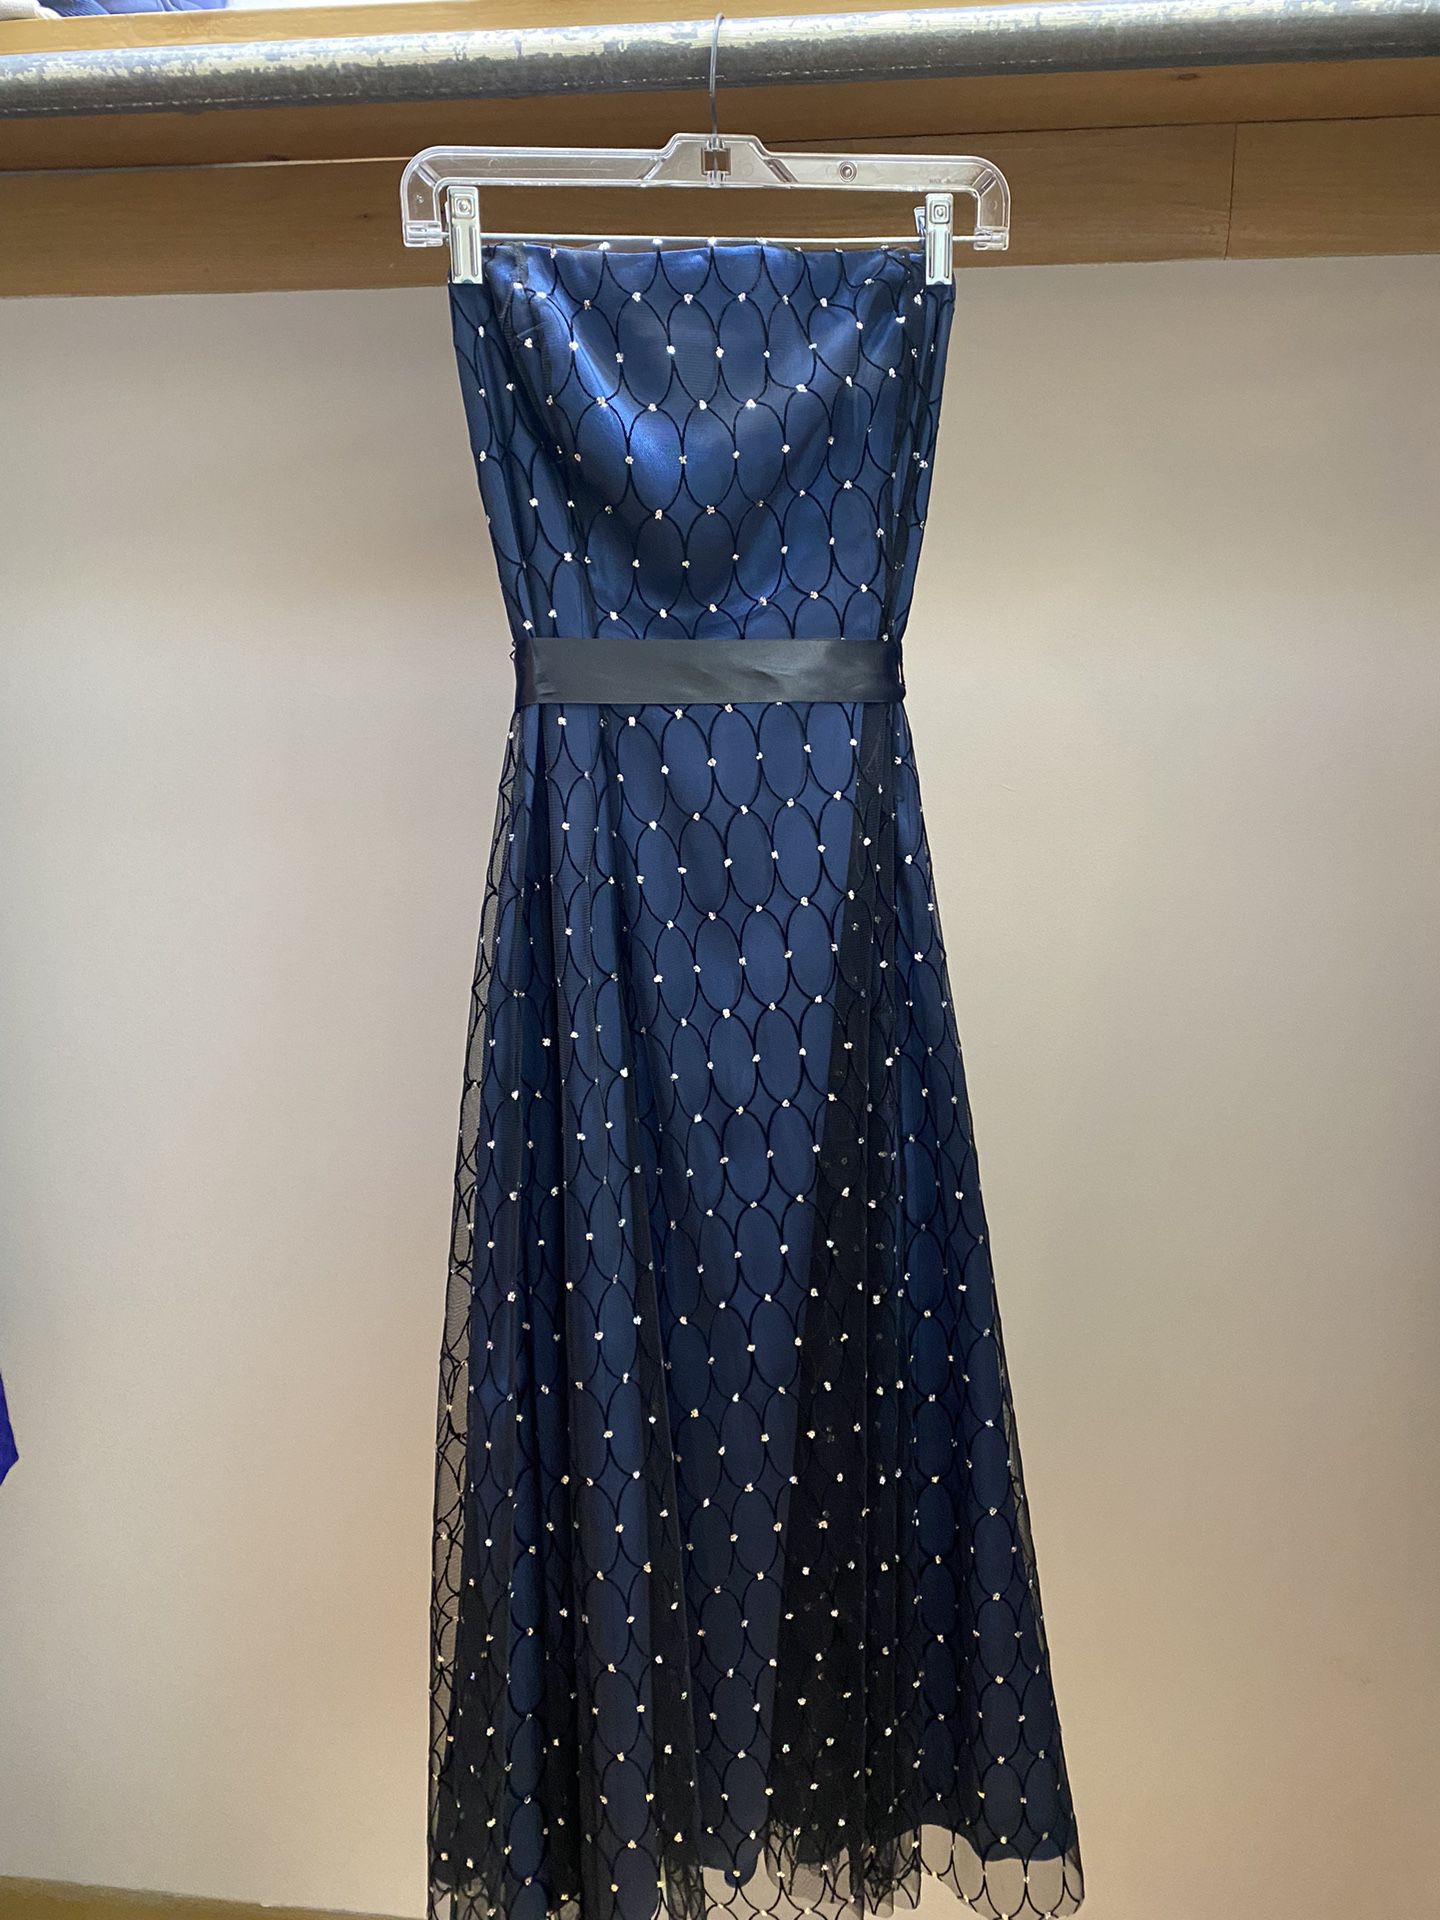 Strapless Dress Size 8 - Adrianna Papell Boutique